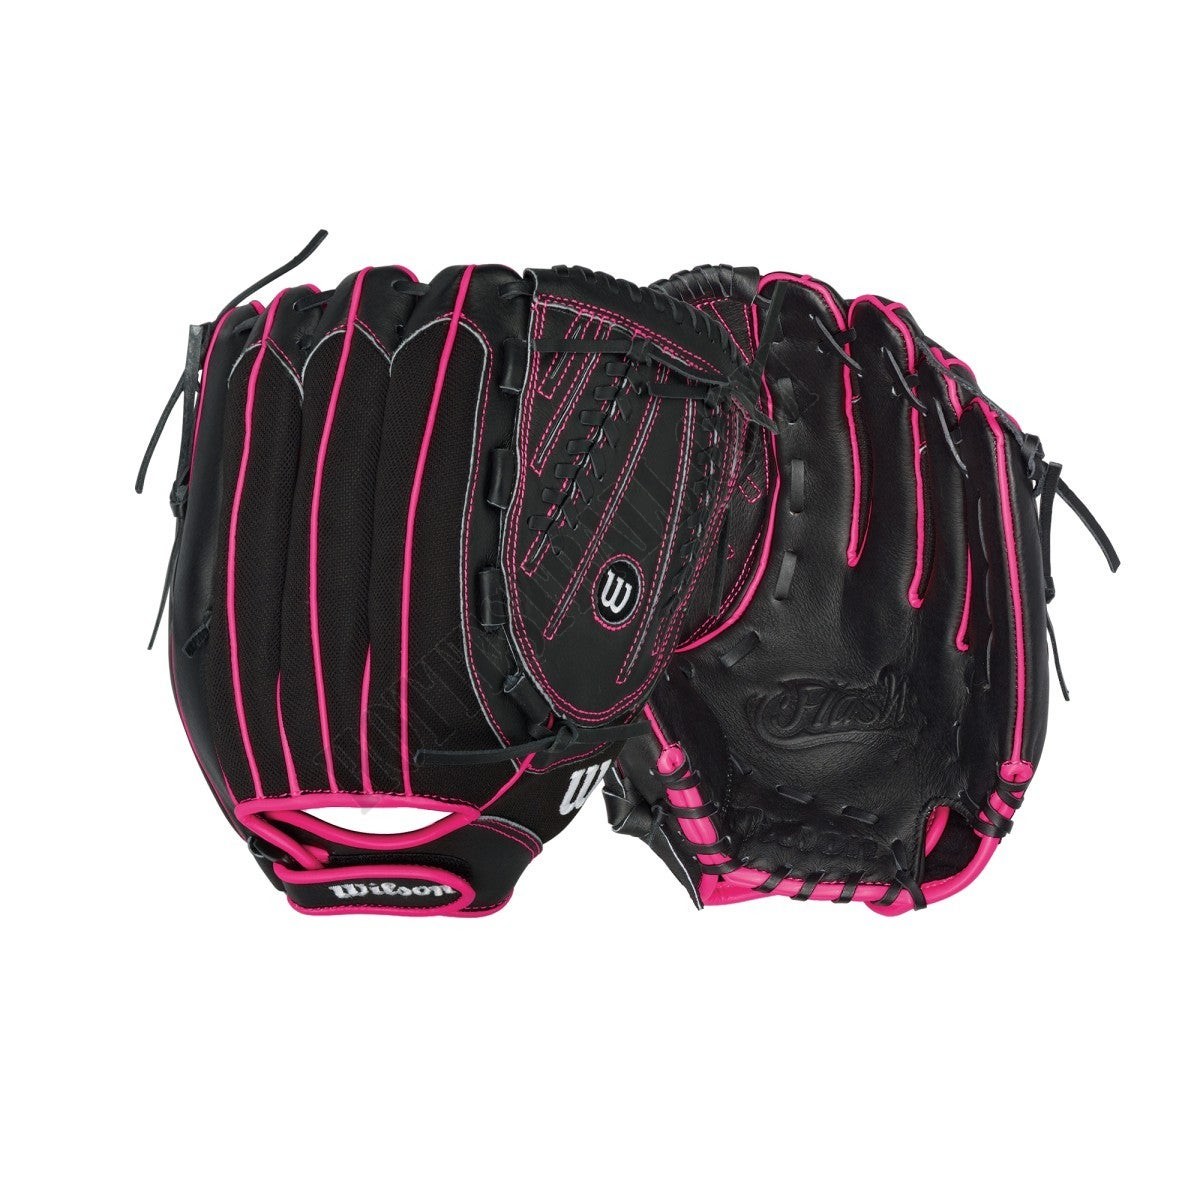 Flash 12" Fastpitch Glove ● Wilson Promotions - -0